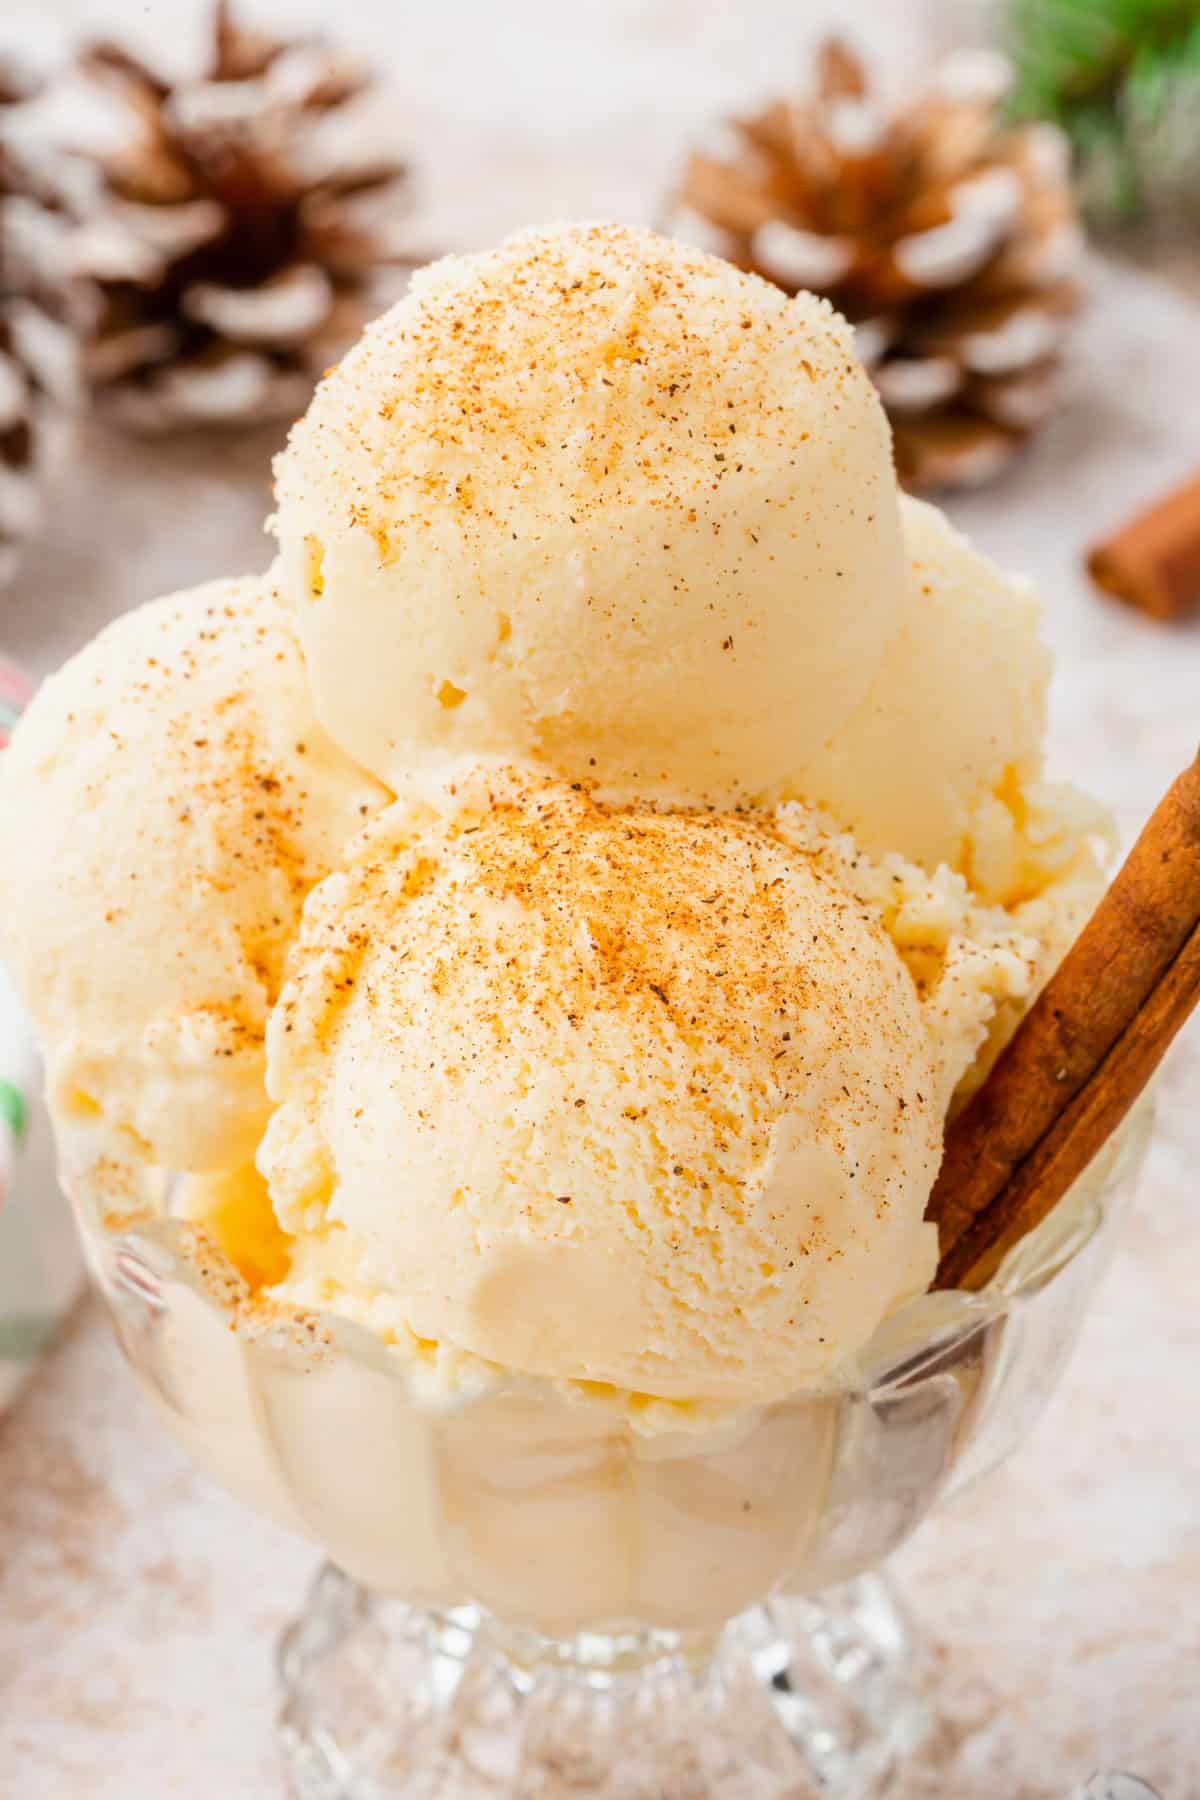 A glass dish filled with scoops of eggnog ice cream sprinkled with ground nutmeg and a cinnamon stick inserted into the dish.